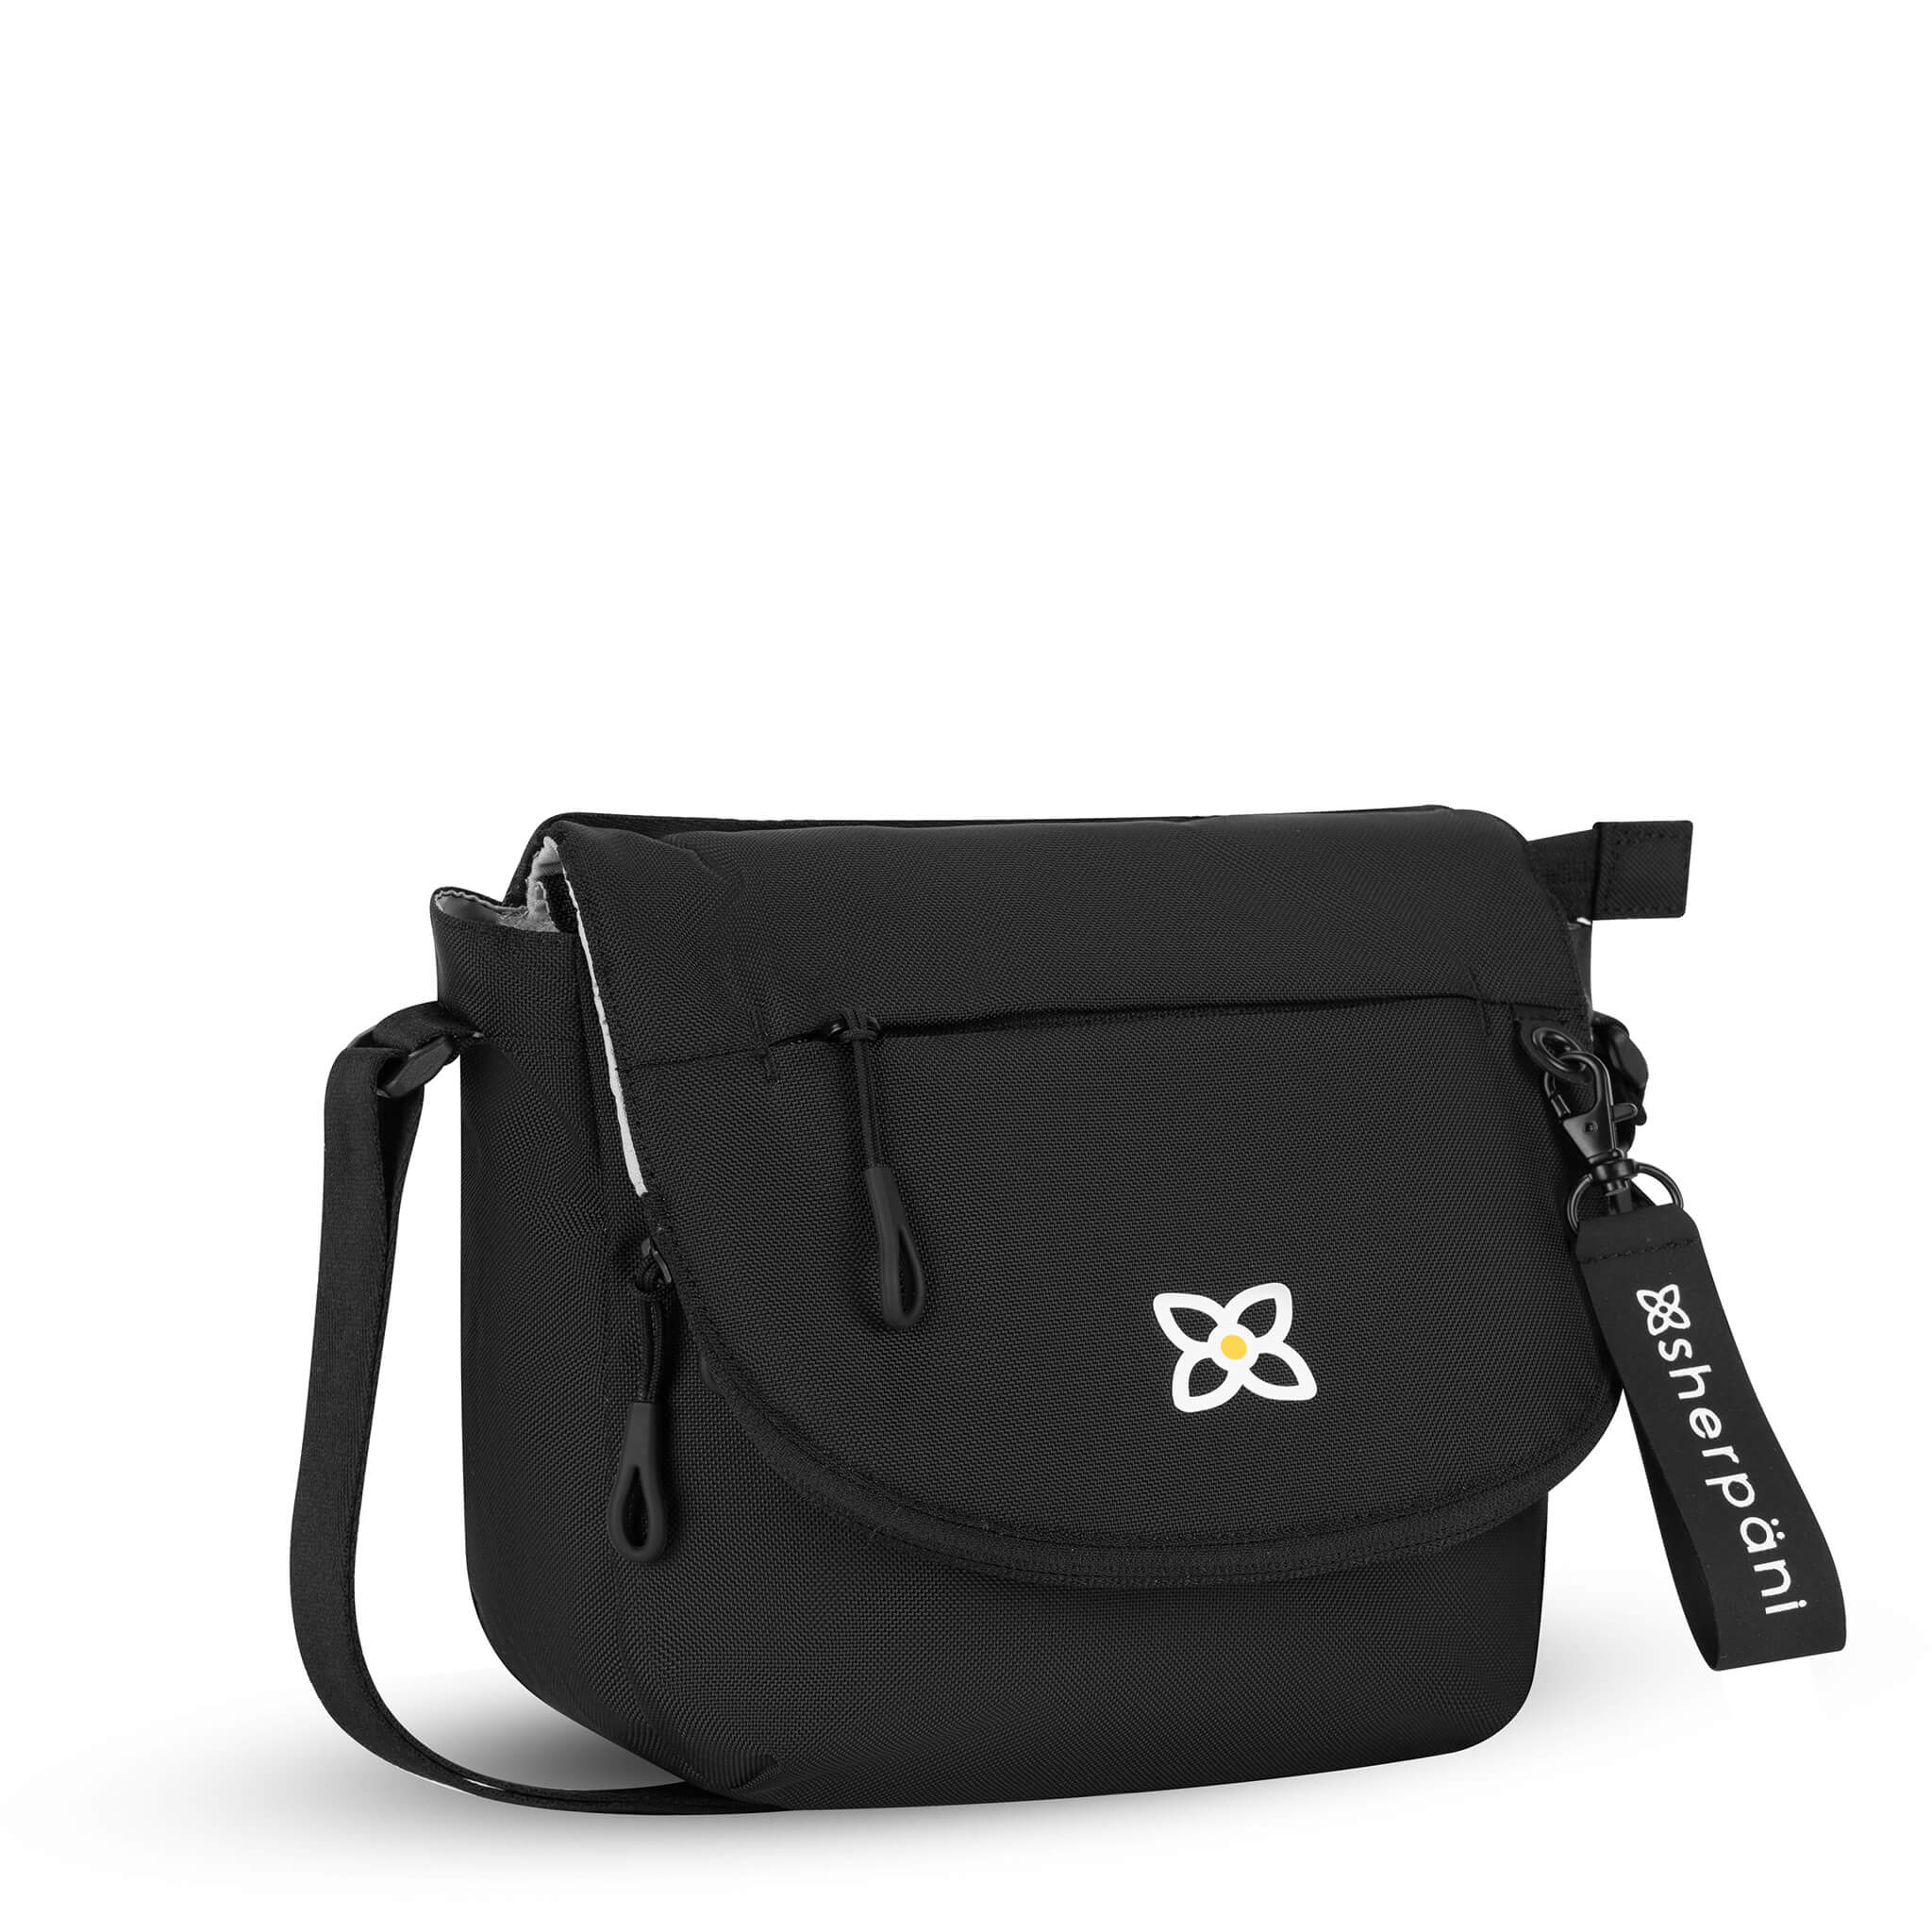 Angled front view of Sherpani messenger satchel bag, the Milli in Raven. Milli features include an adjustable crossbody strap, front zipper pocket, brimmed zipper pocket, detachable keychain, magnetic closure, RFID security and multiple internal pockets for organization. The Raven color is a true black with Sherpani logo (edelweiss flower) accented in white. #color_raven